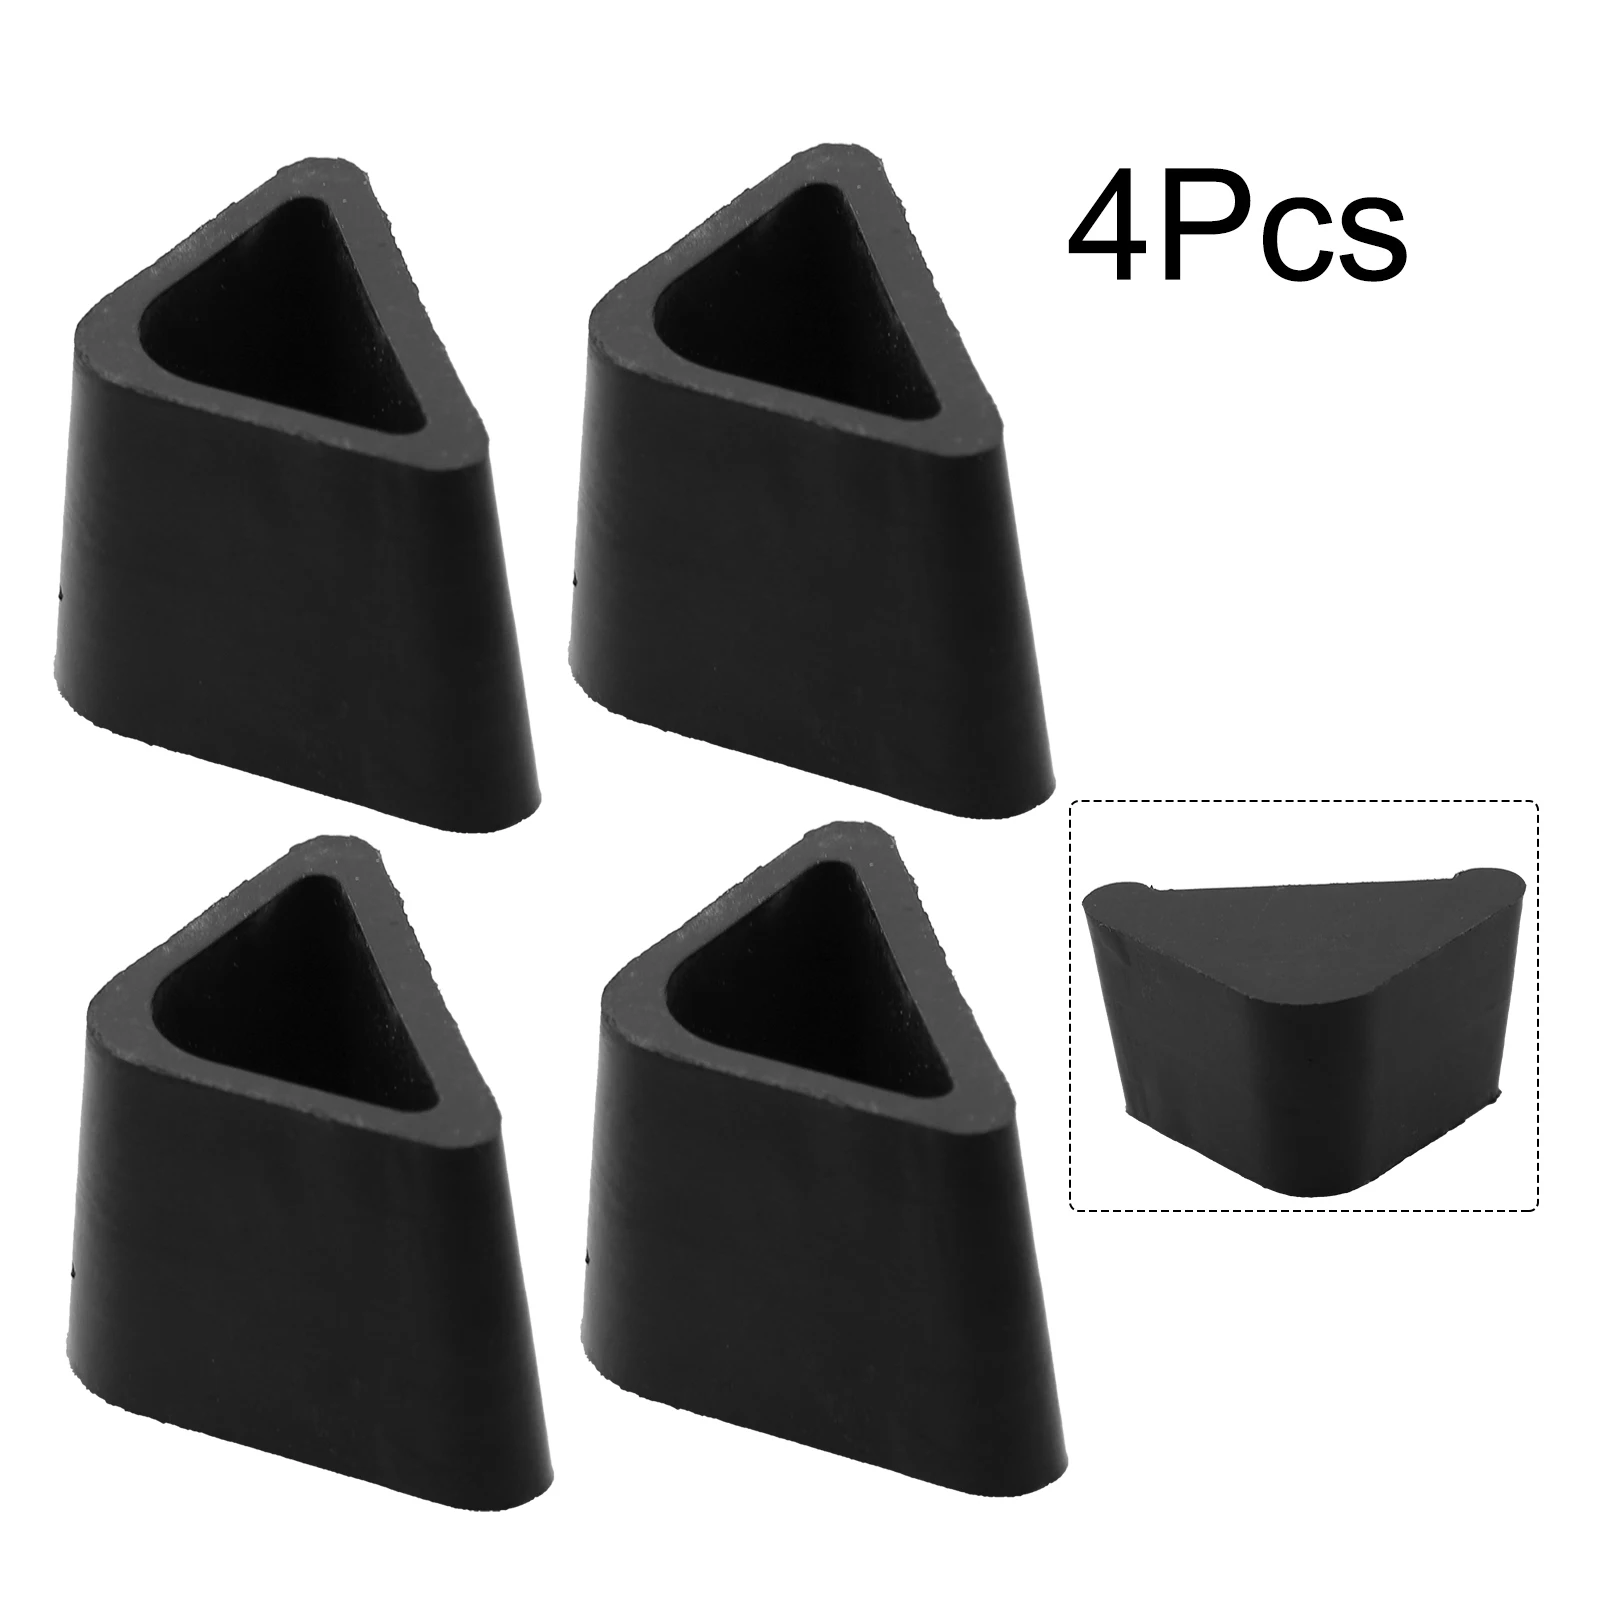 Power Tools Table Trestle Foot 4 Trestle Foot Black High Quality Material 4 Pack Plastic Replacement Trestle Foot